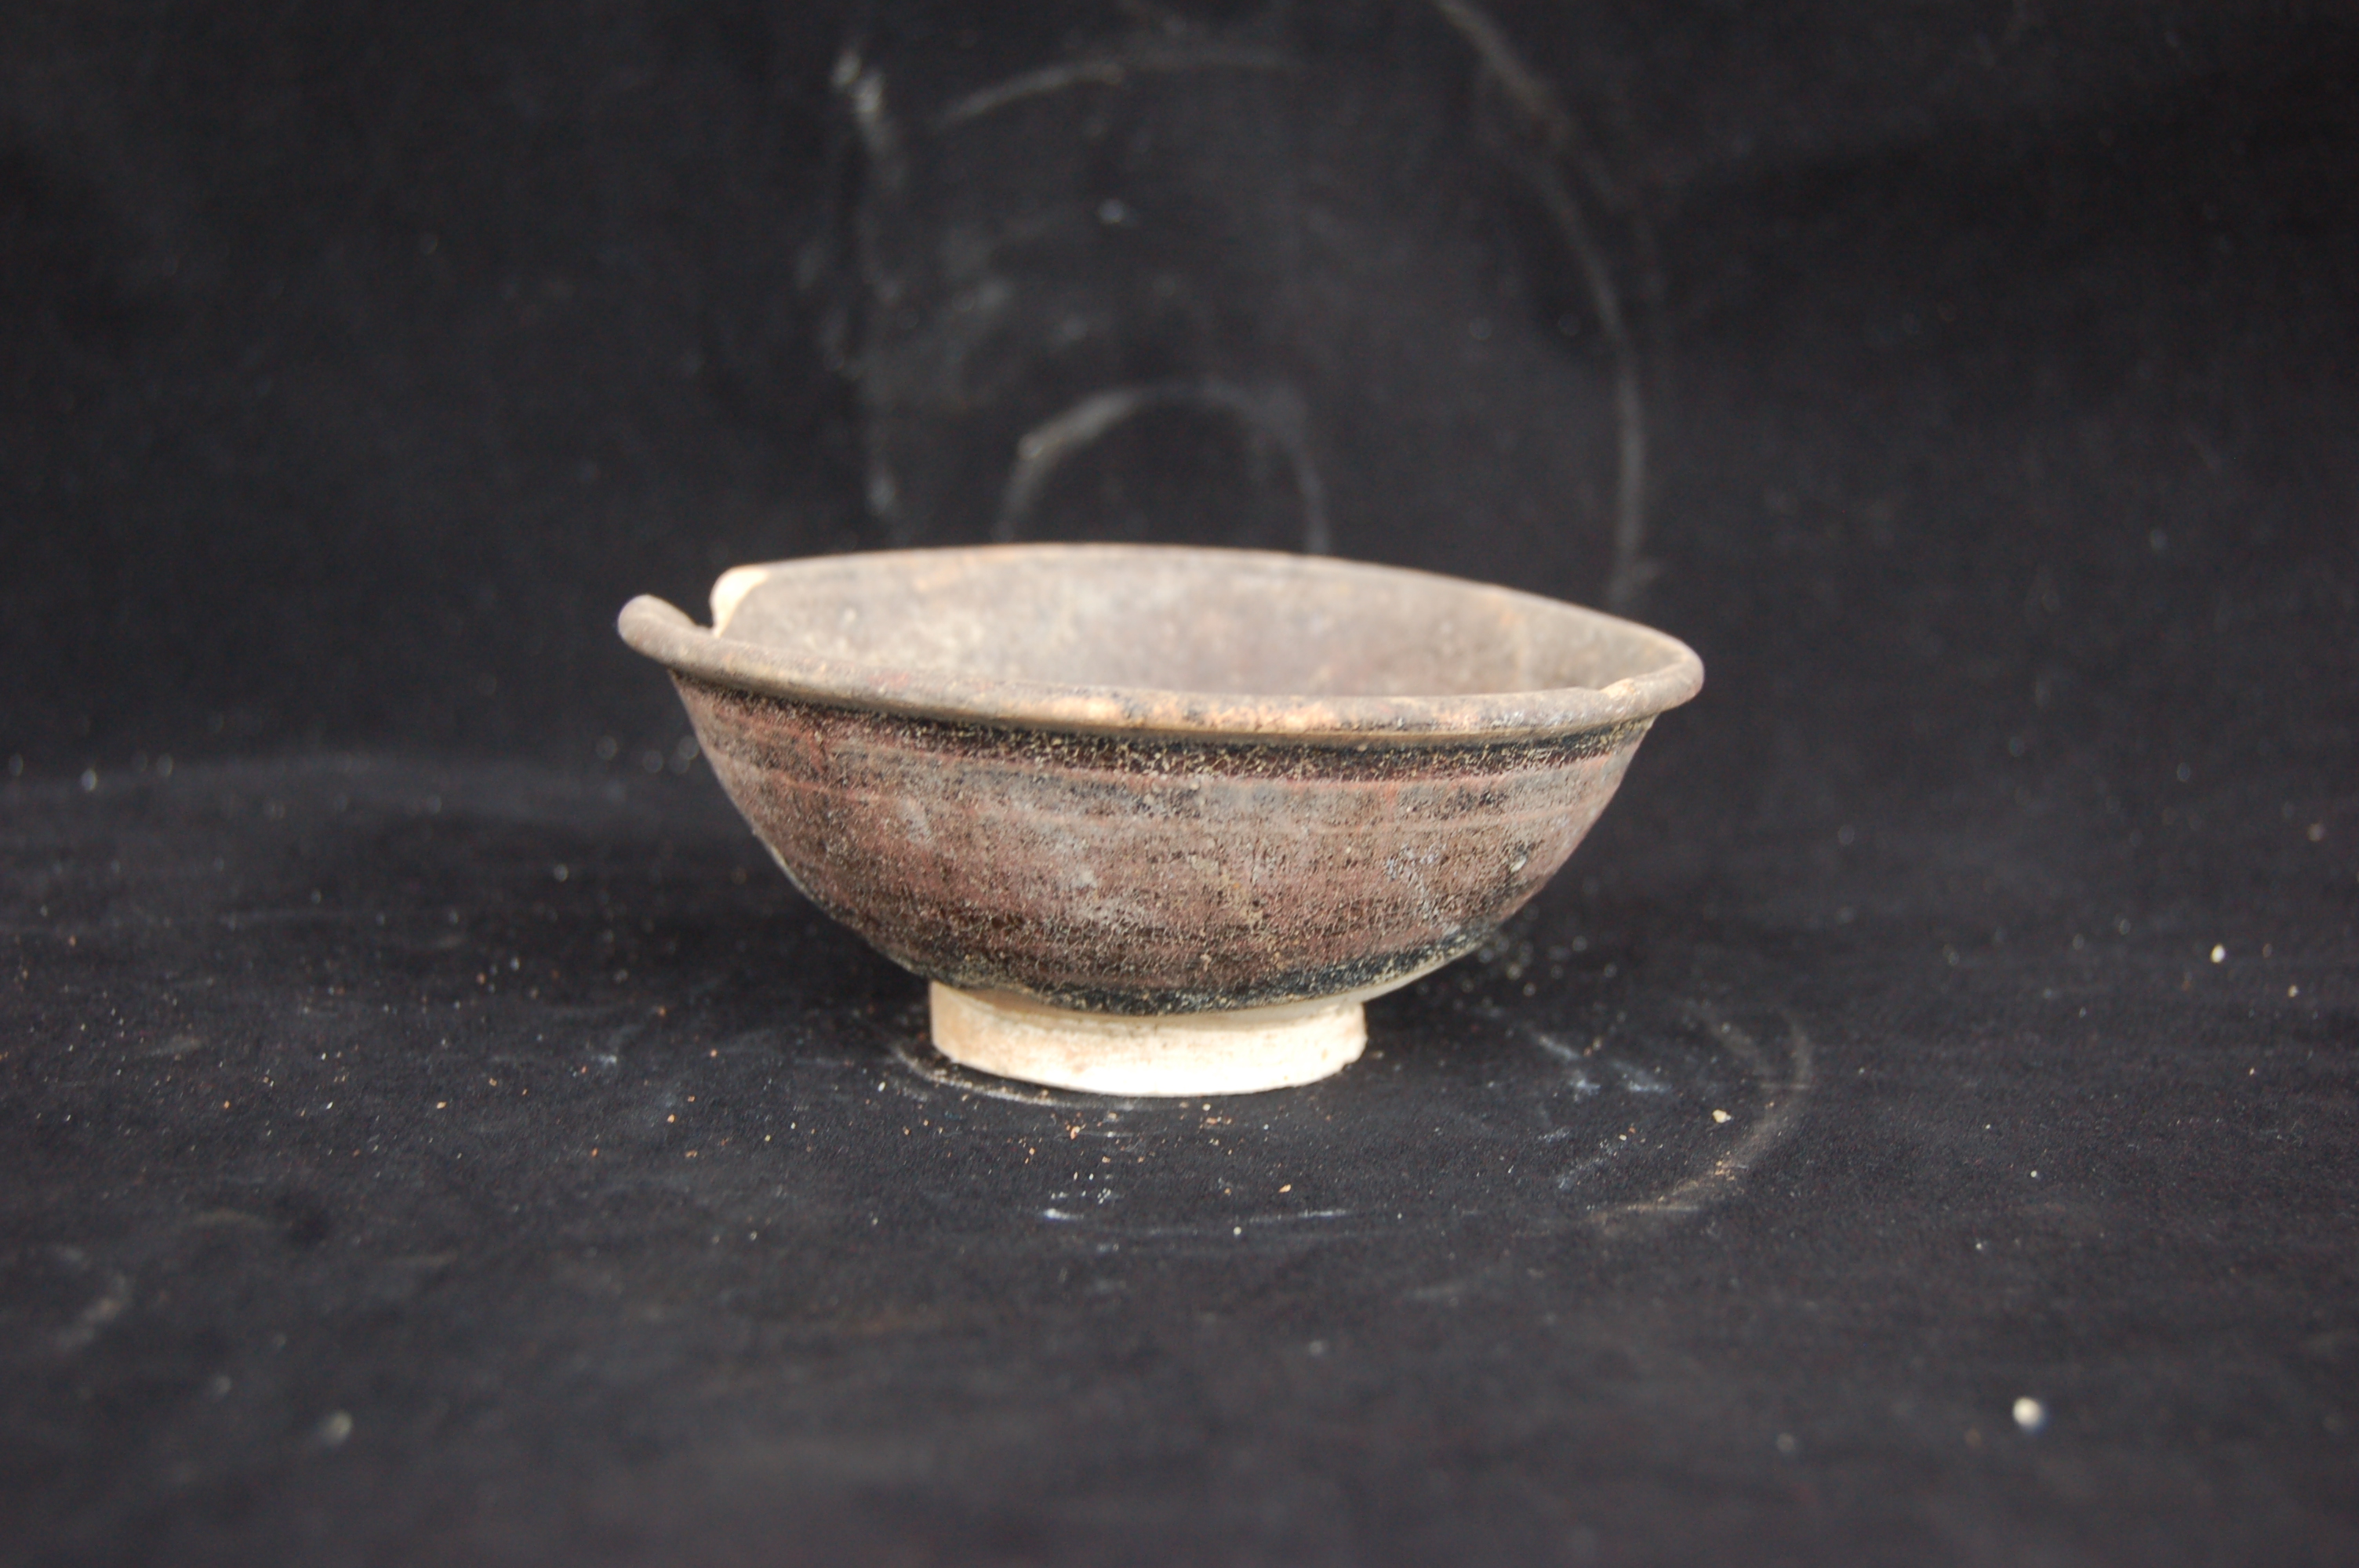 Small <em>temmoku</em> with an everted rim, rounded wall and carved foot-ring. Diameter 11 cm, height 4.5 cm.